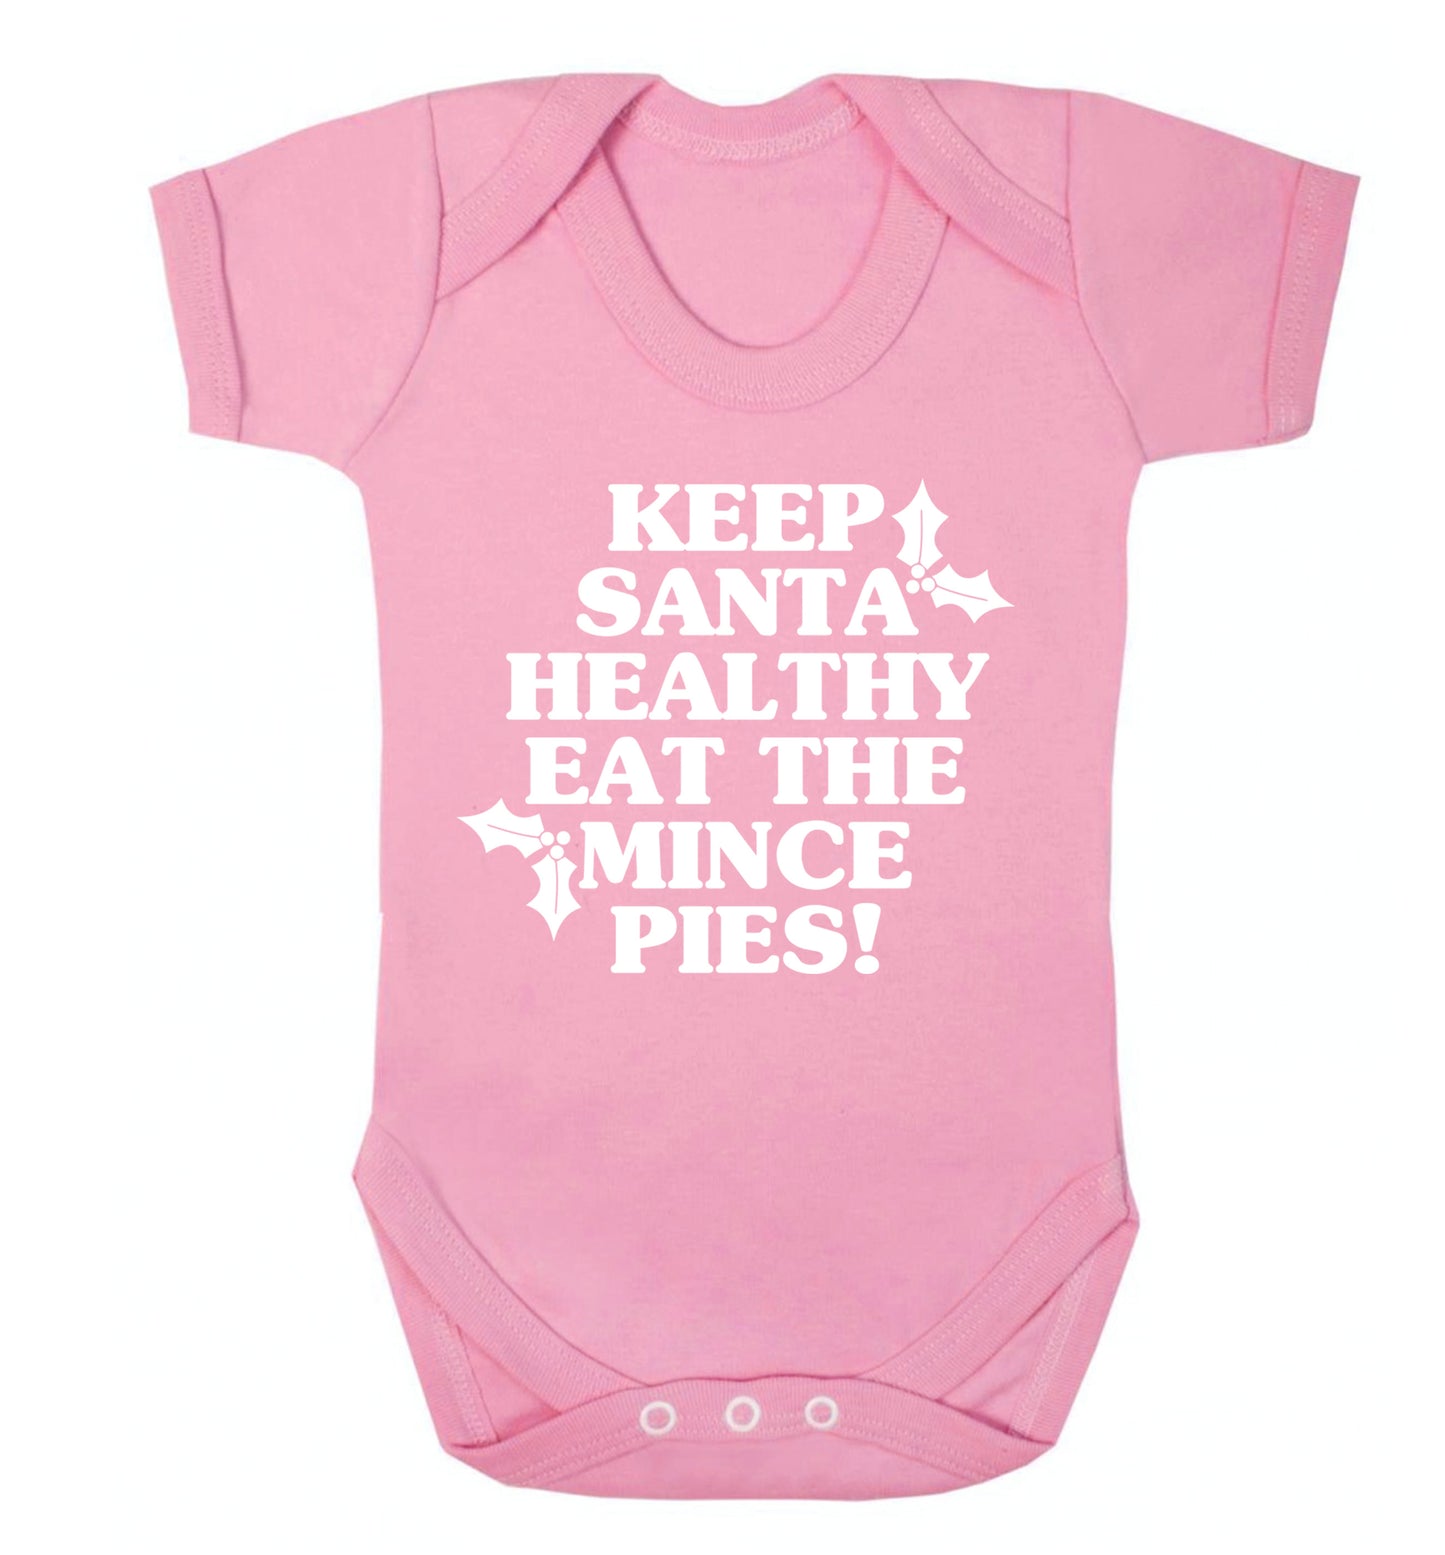 Keep santa healthy eat the mince pies Baby Vest pale pink 18-24 months